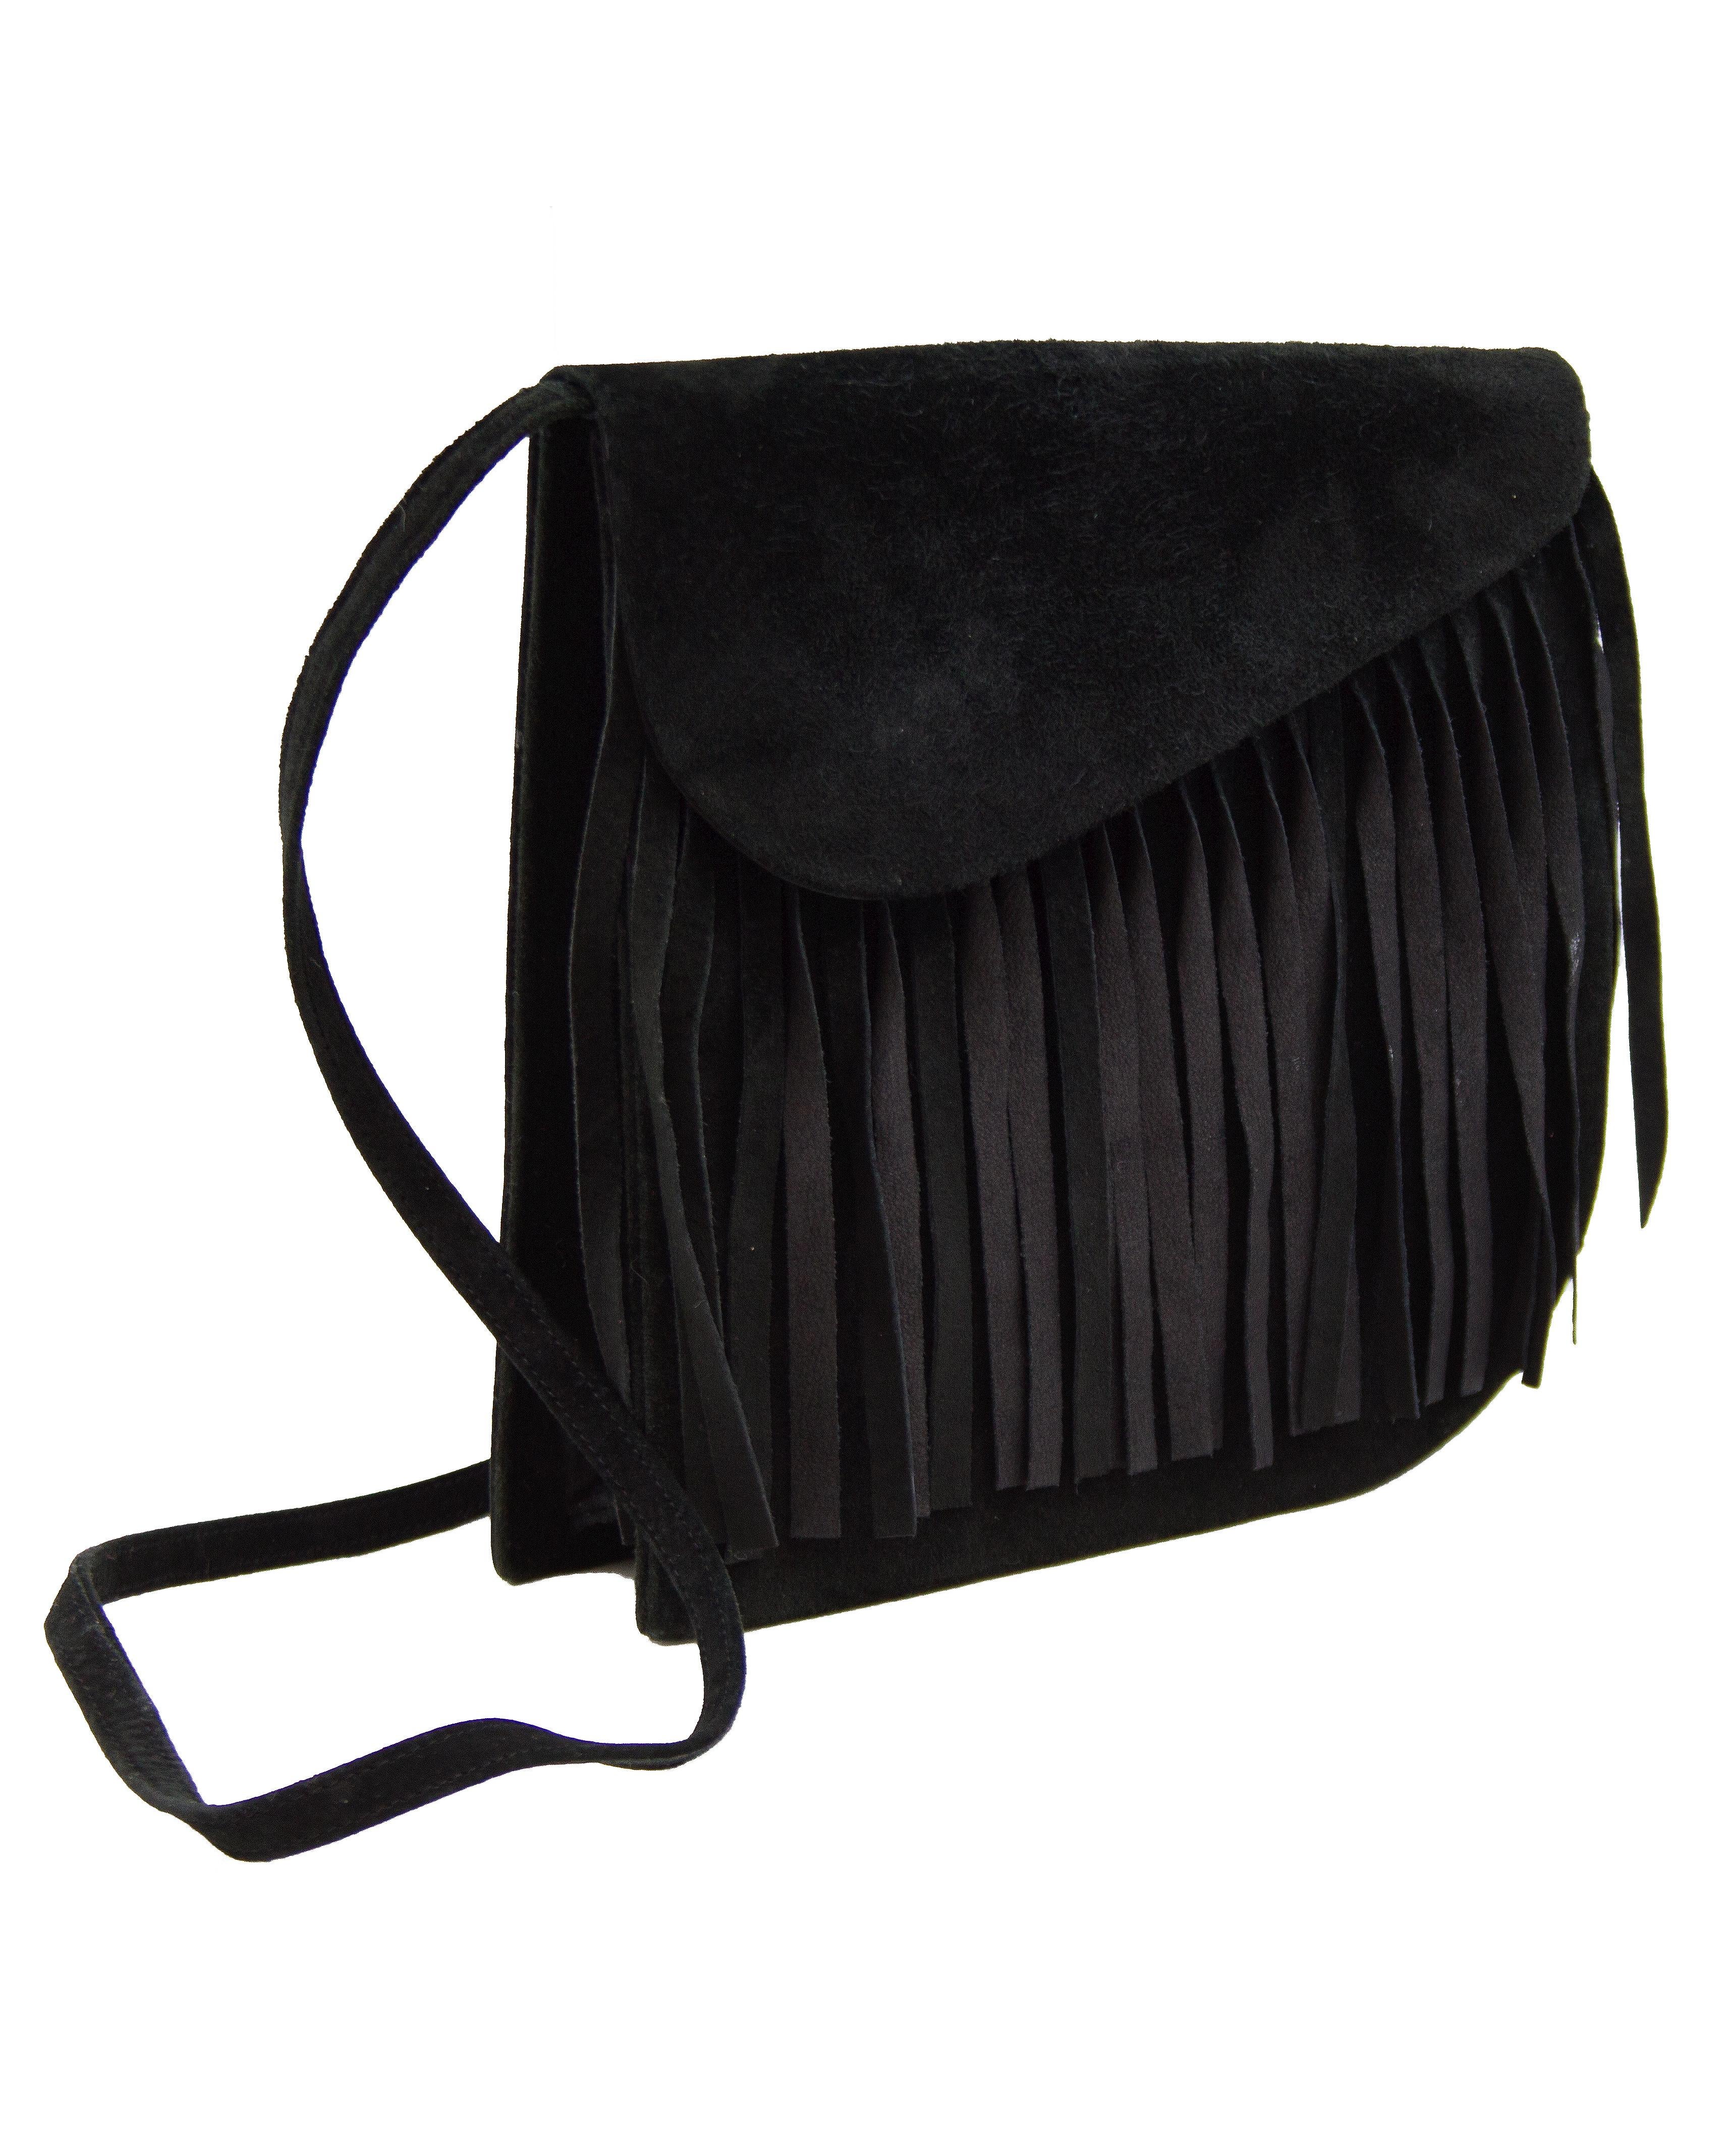 The ultimate 1980's Yves Saint Laurent accessory. Black suede bag with long strap that can be worn cross body. Fringe detail across front flap, giving that iconic elevated YSL hippy vibe. Purse flap closes with double gold magnetic snaps. Good